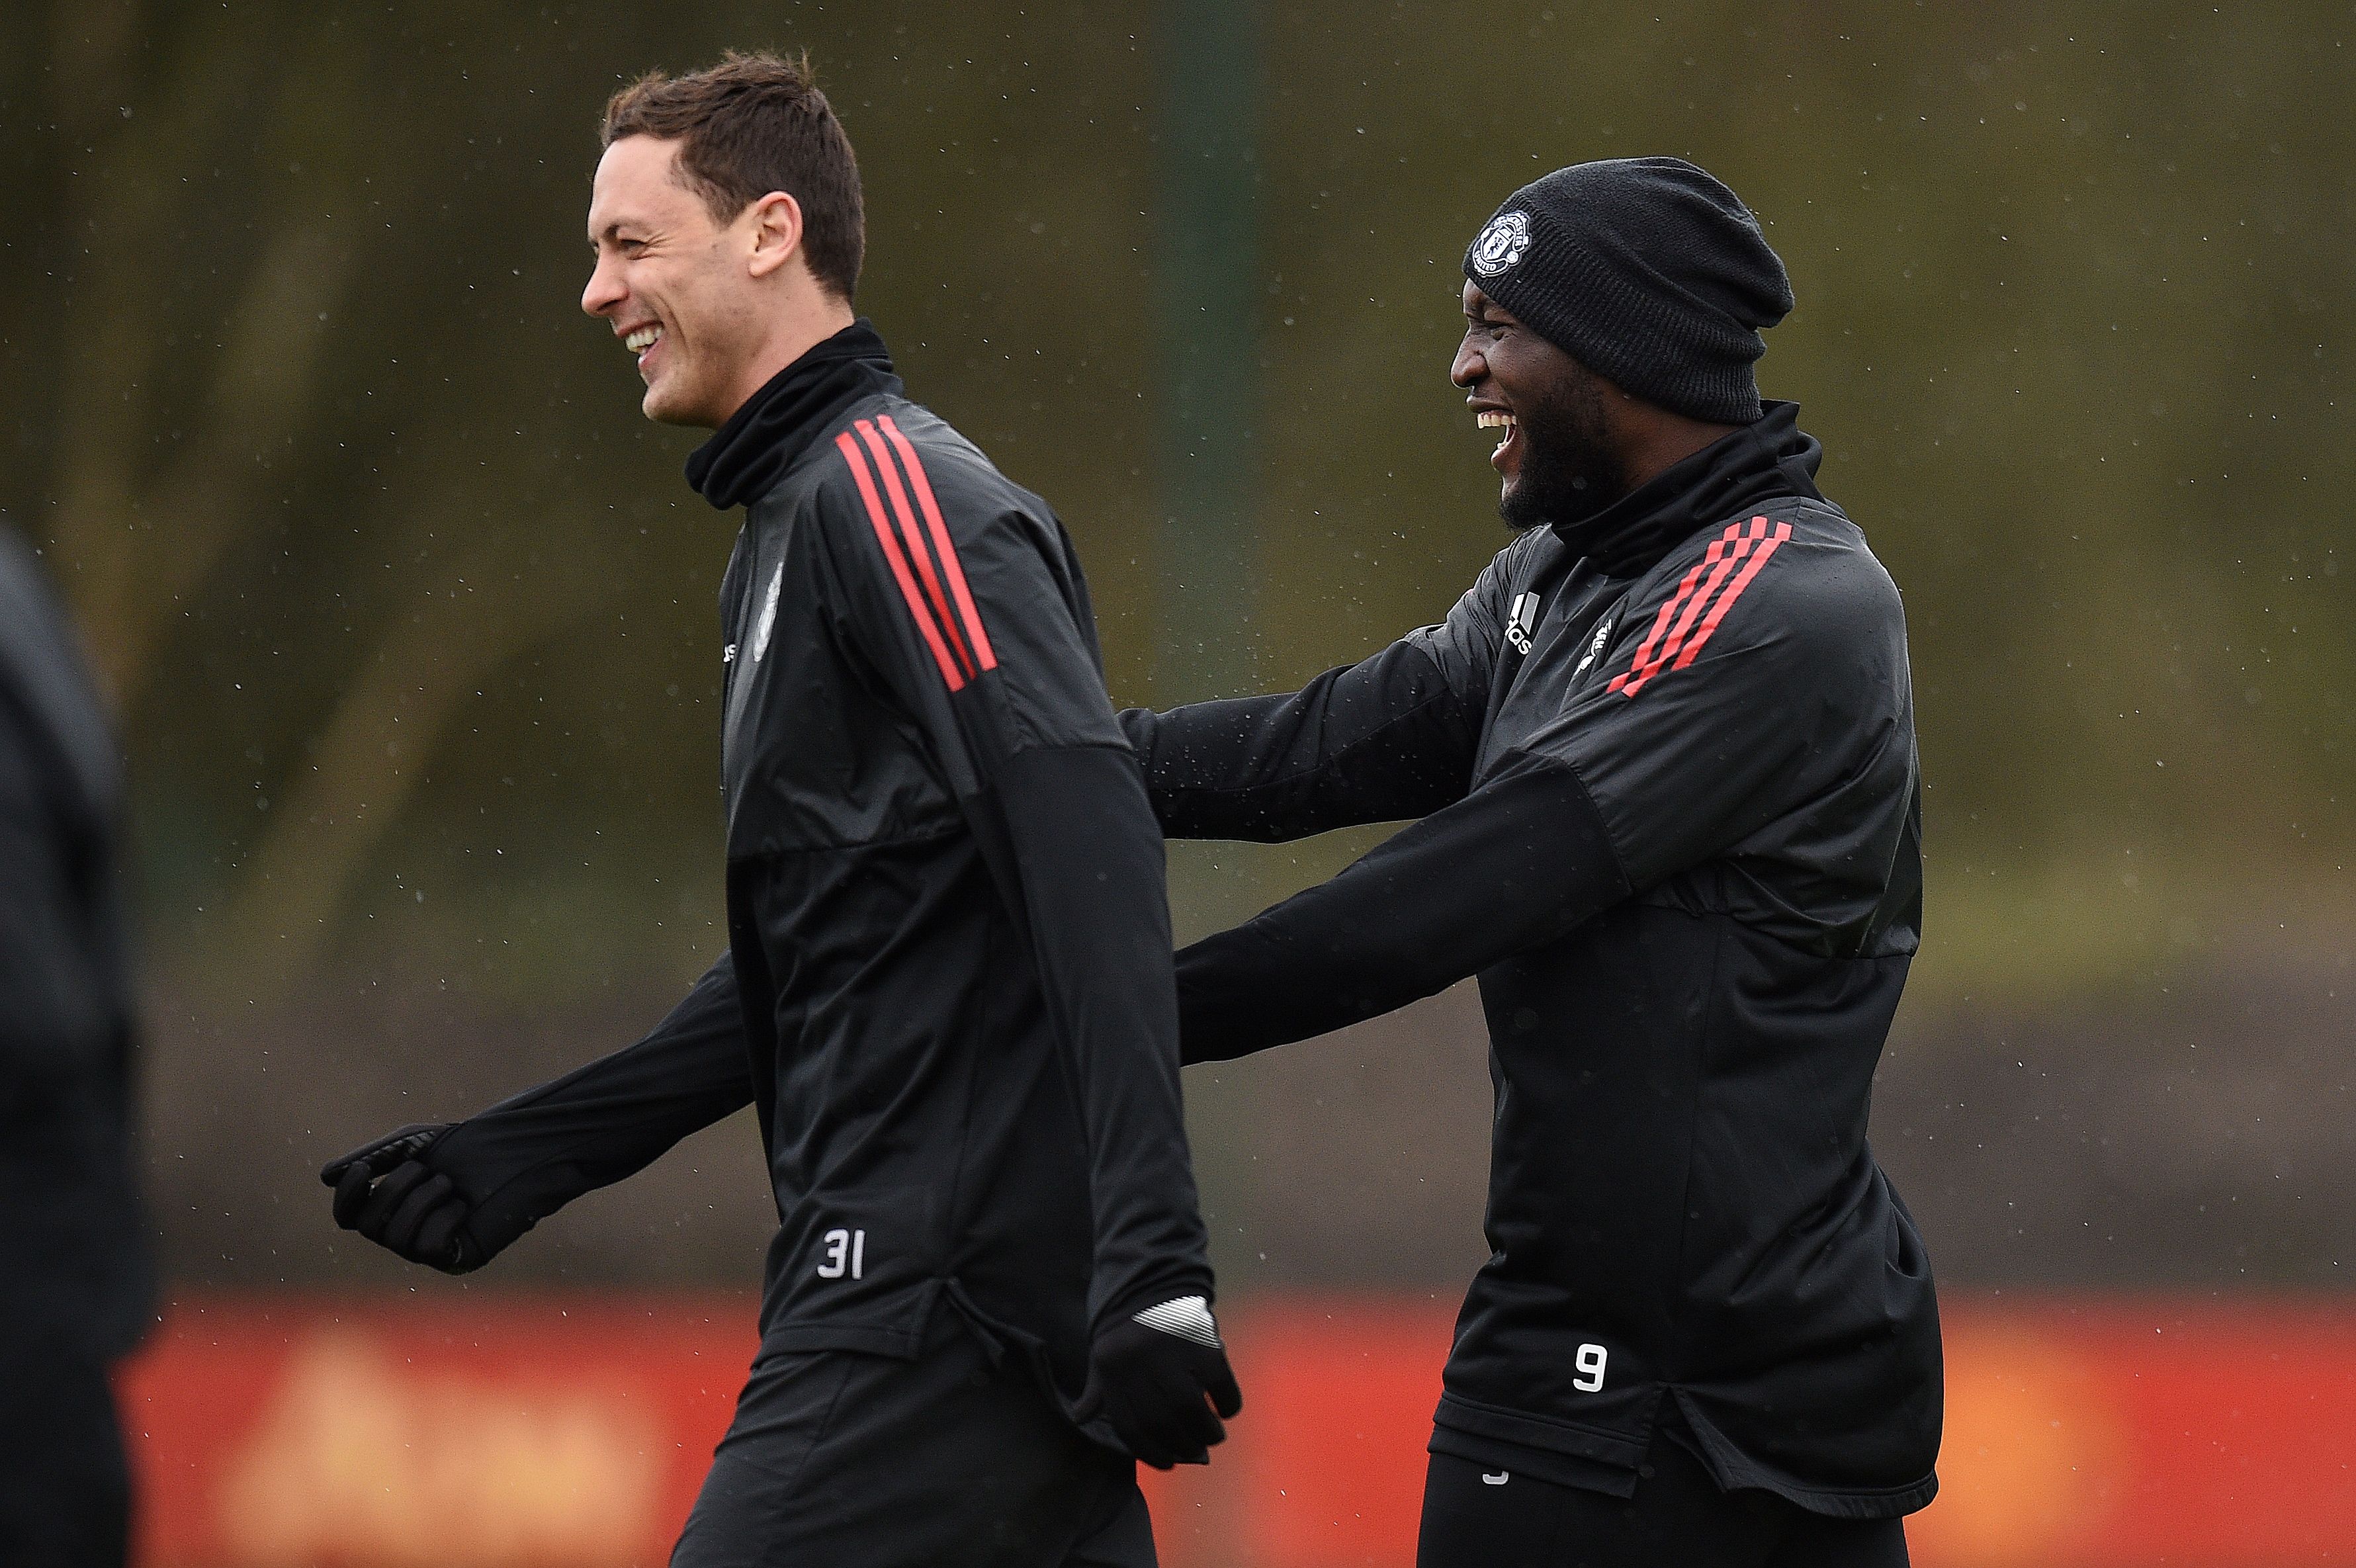 Manchester United's Serbian midfielder Nemanja Matic (L) and Manchester United's Belgian striker Romelu Lukaku attend a team training session at the club's training complex near Carrington, west of Manchester in north west England on March 12, 2018, on the eve of their UEFA Champions League round of 16 second-leg football match against Sevilla. / AFP PHOTO / Oli SCARFF        (Photo credit should read OLI SCARFF/AFP/Getty Images)